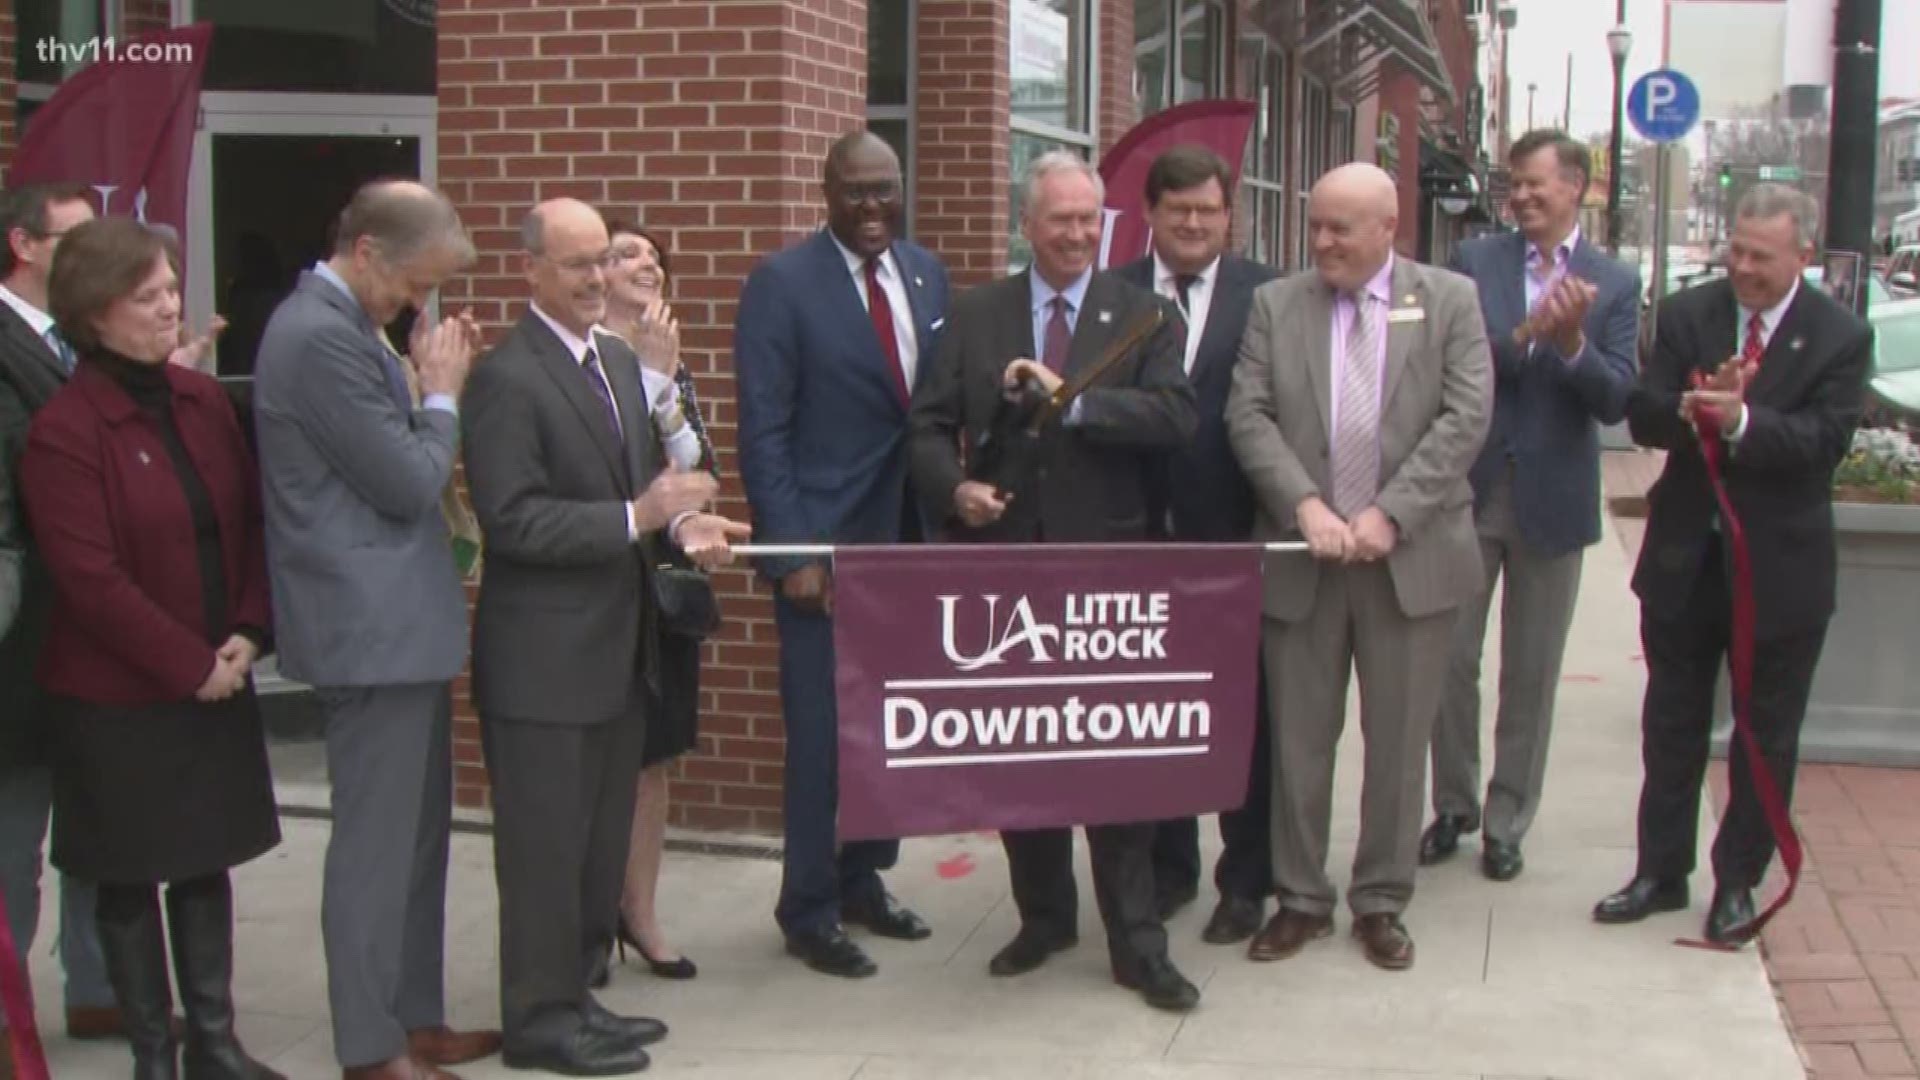 The University of Arkansas at Little Rock expands operations with a grand opening for its new downtown location.